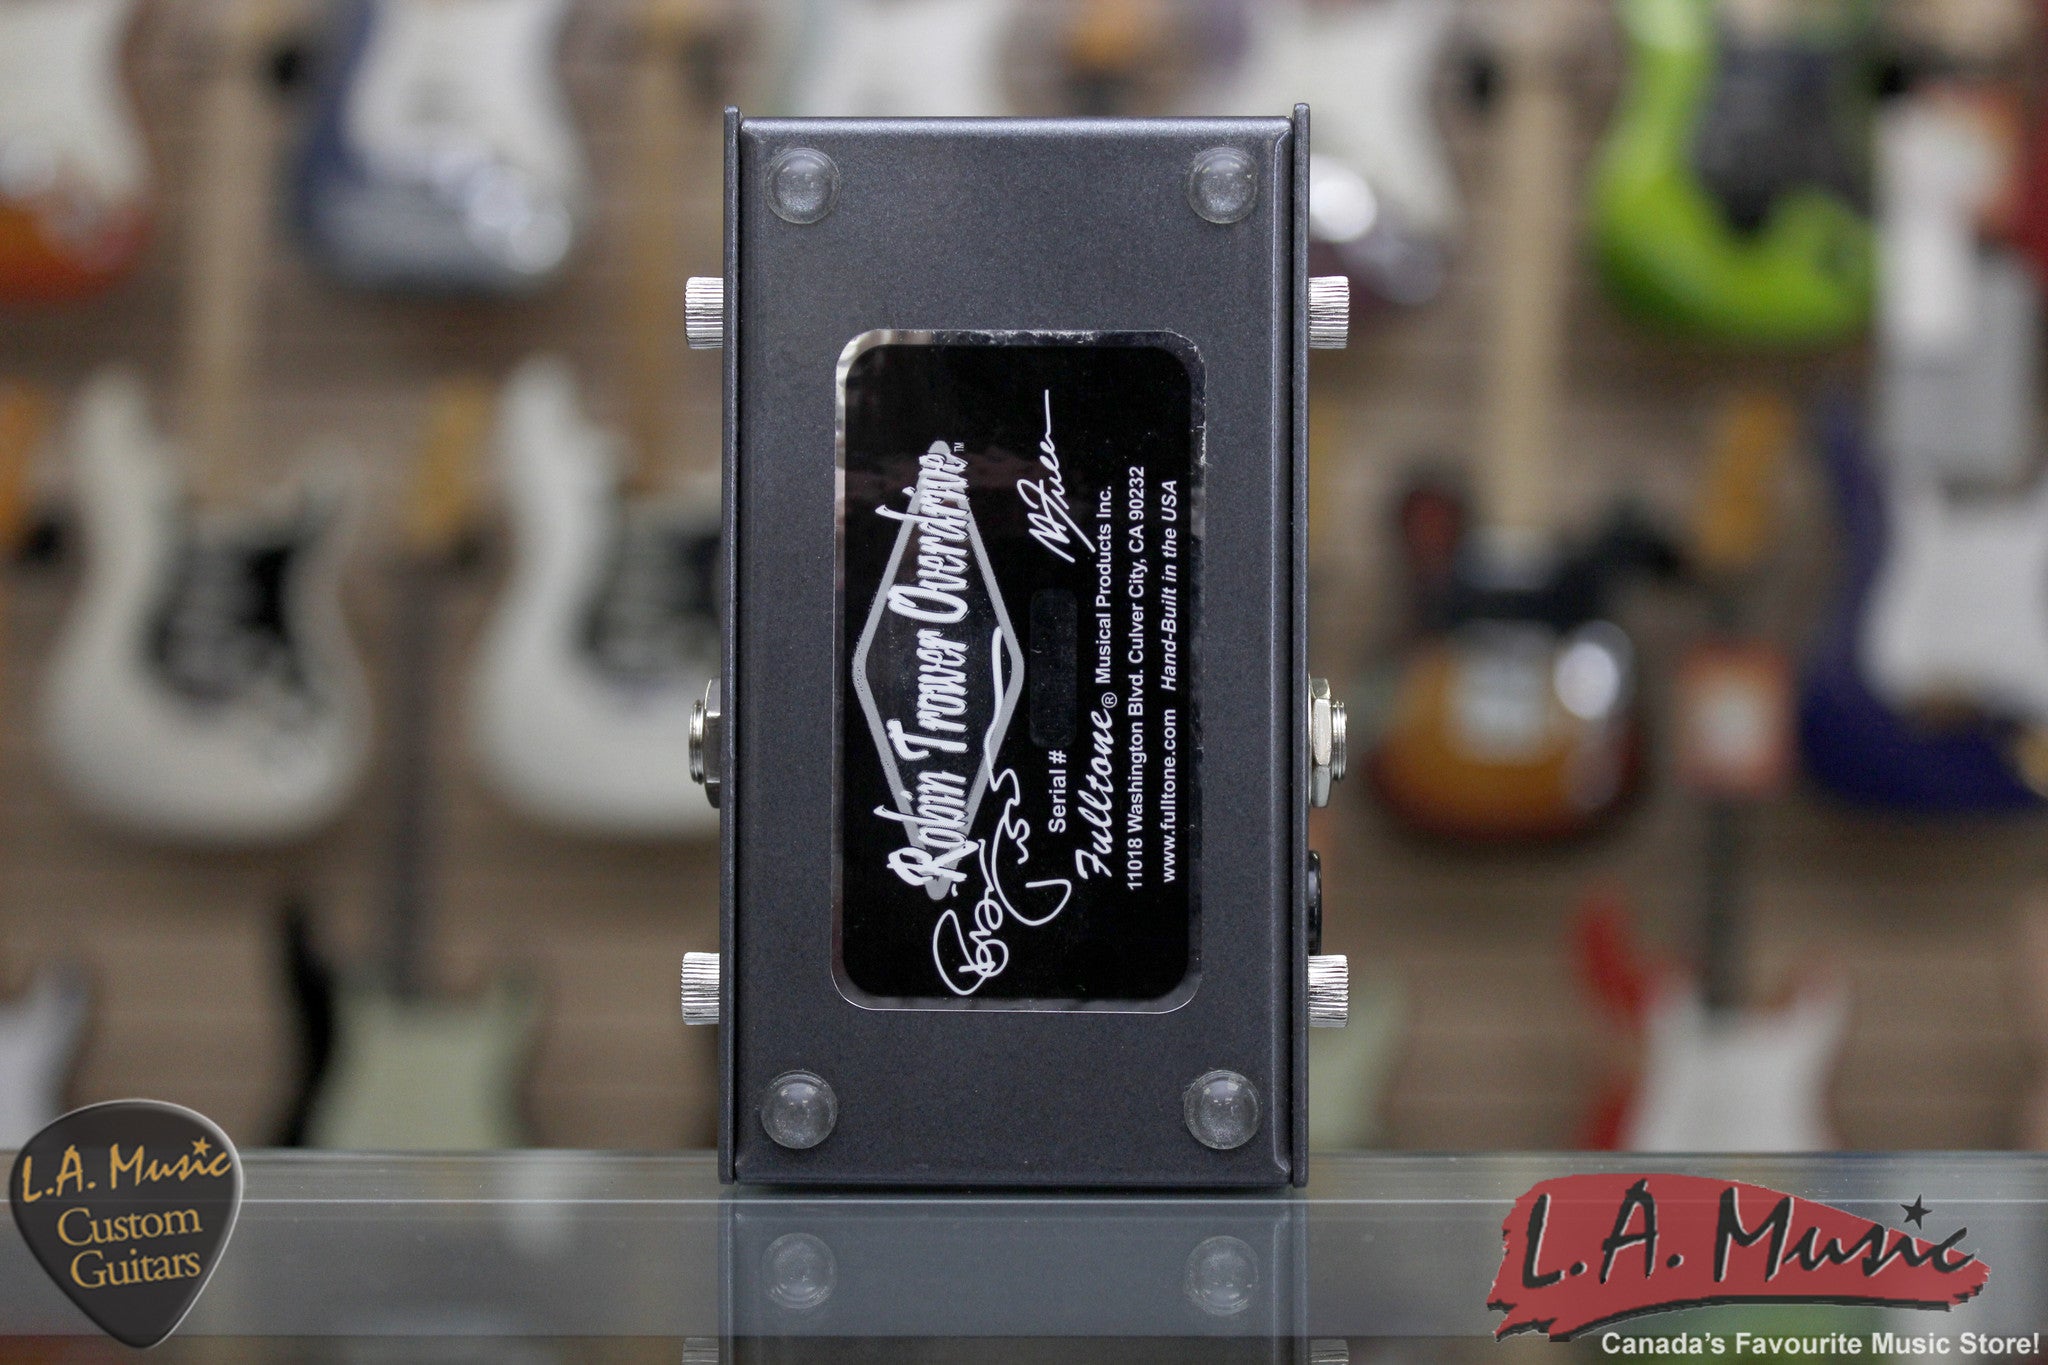 Fulltone Custom Shop Robin Trower Overdrive Guitar Effects Pedal Gray - L.A. Music - Canada's Favourite Music Store!